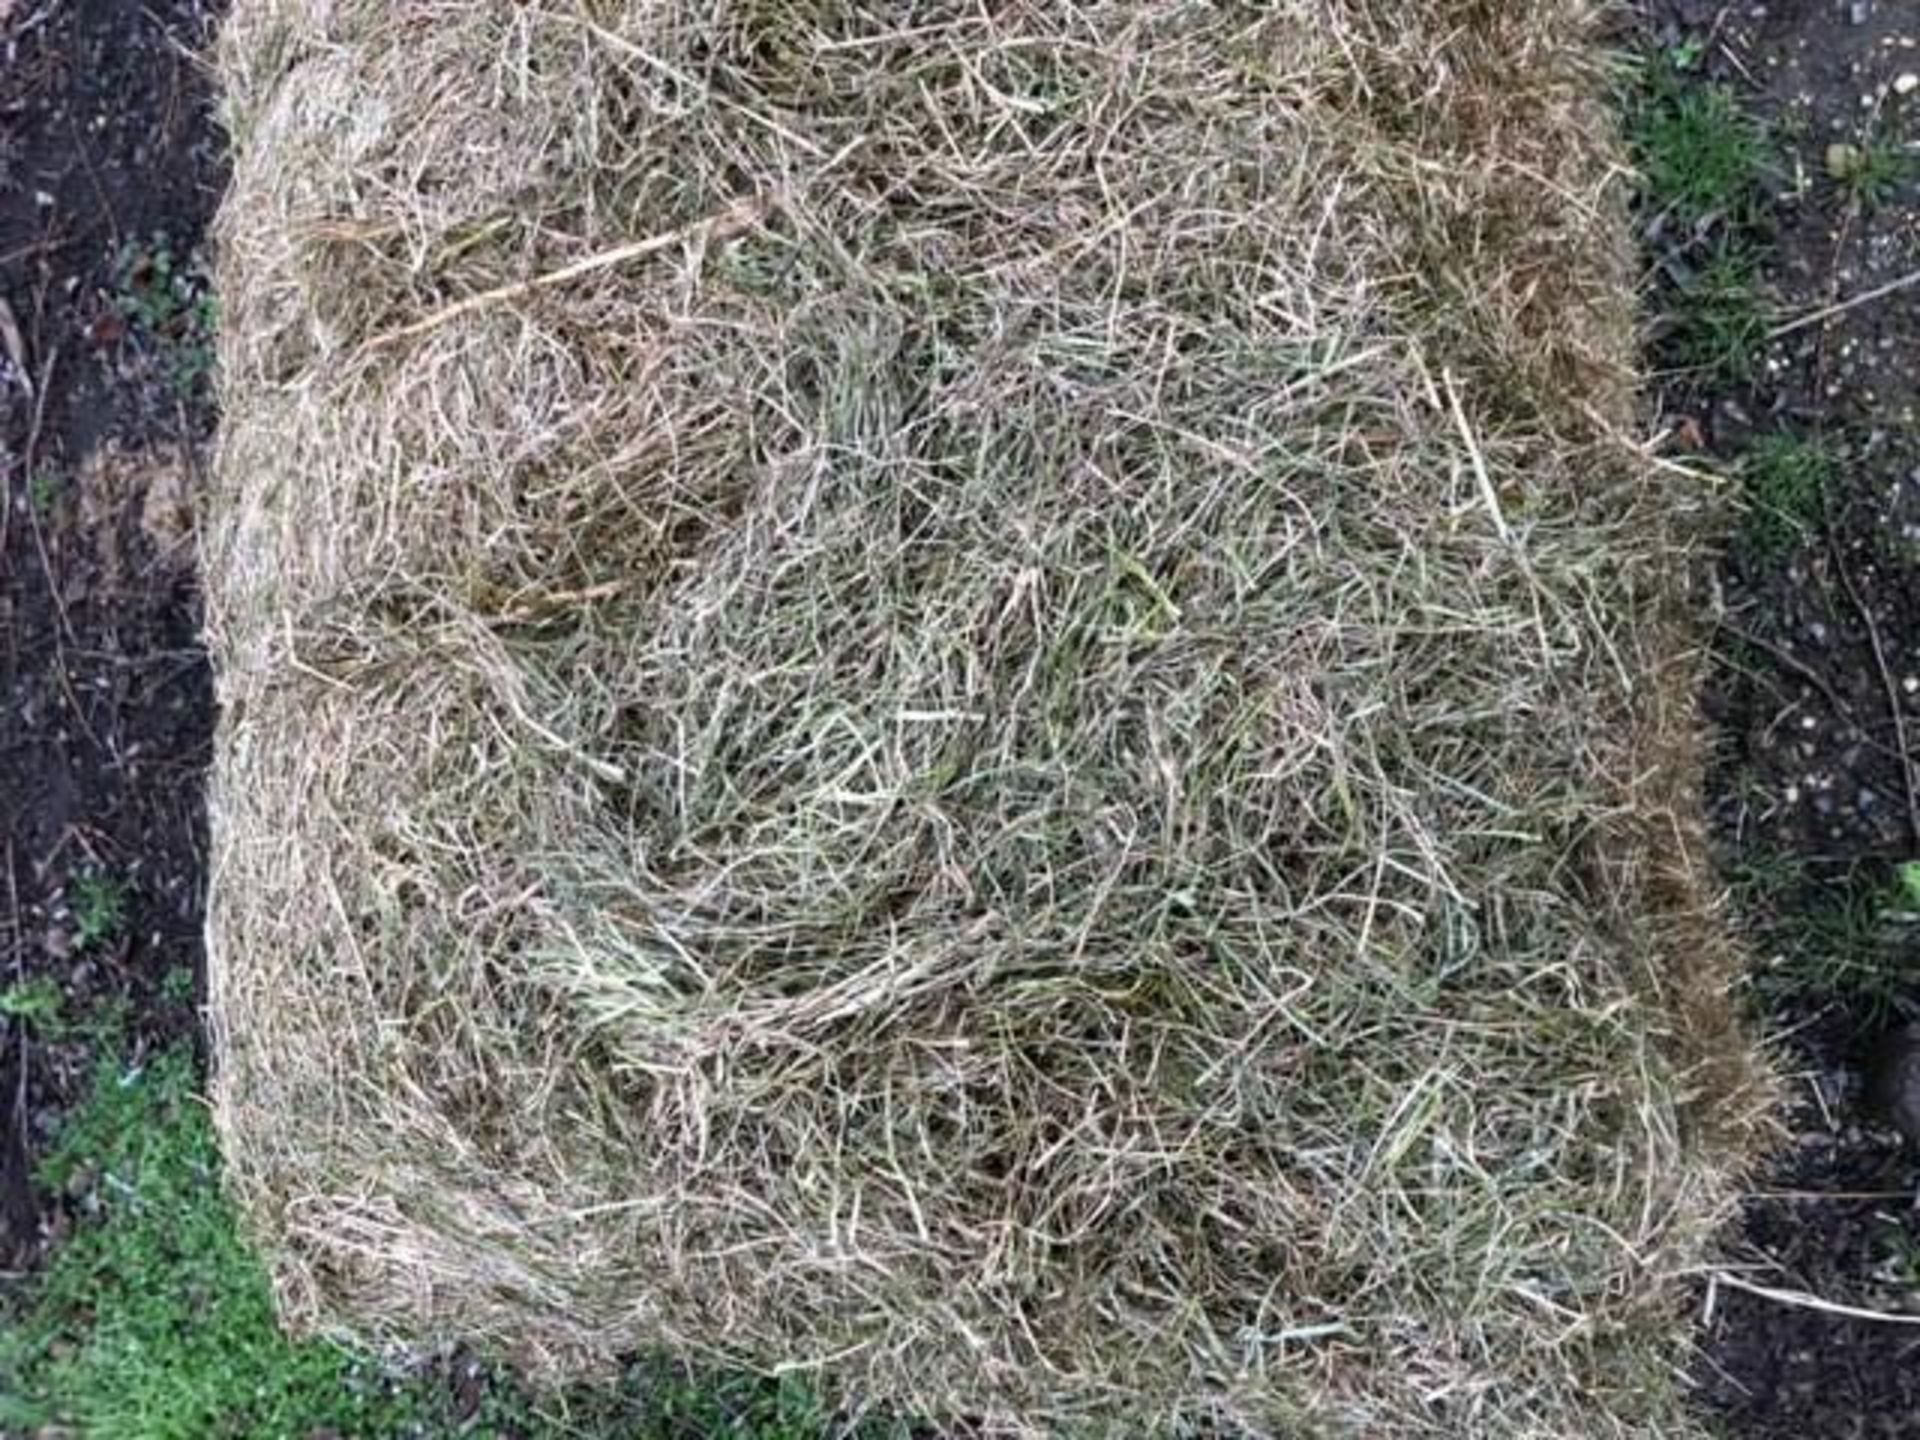 100x 2nd Cut Ryegrass Haylage 2020 - Image 3 of 3